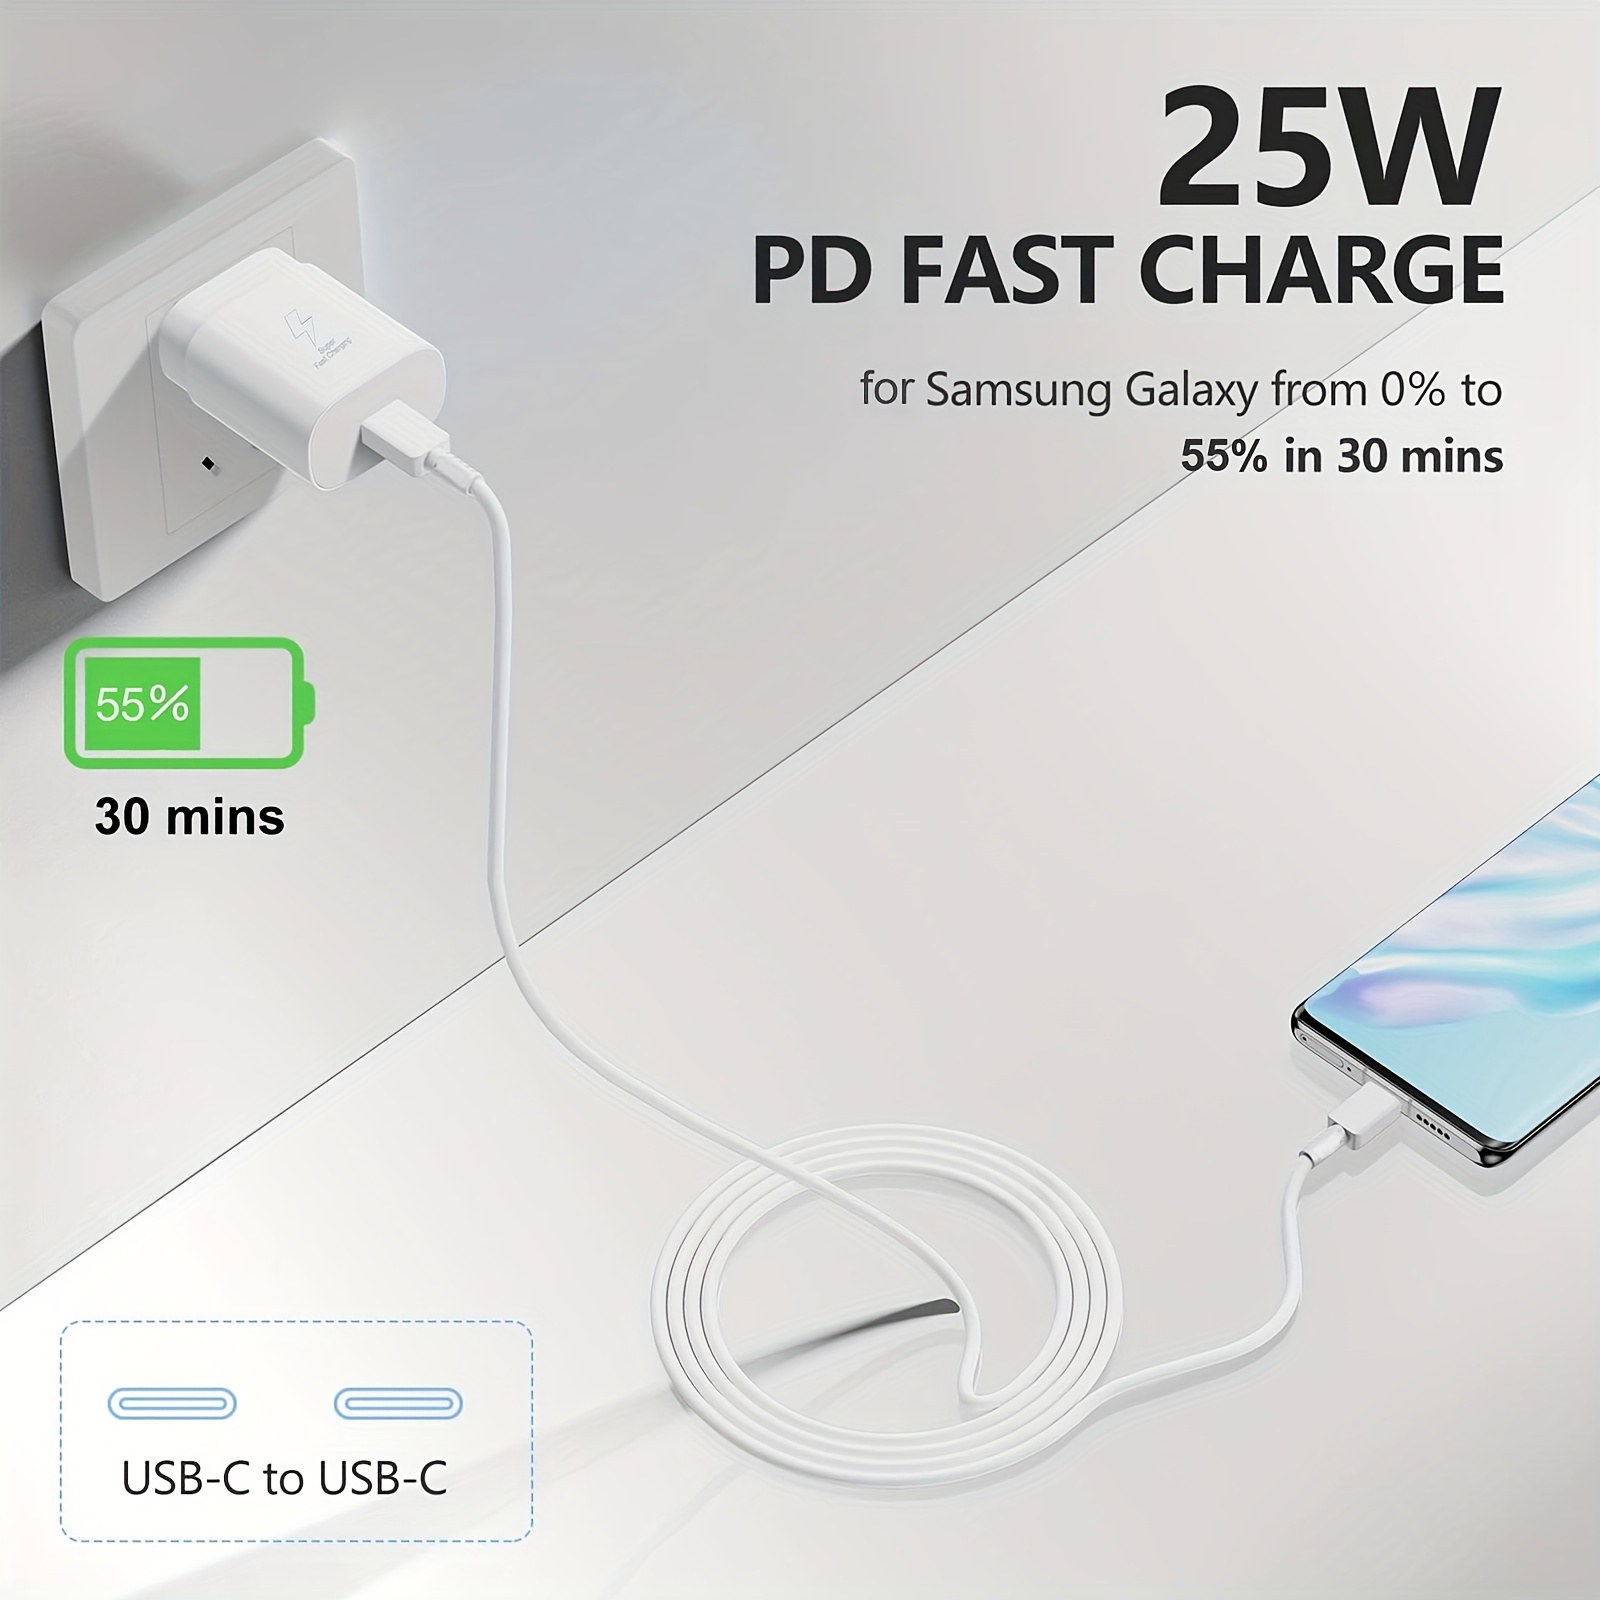 usb c charger super fast charging type c android phone charger with cable cord for samsung galaxy s23 ultra s23 s23 s22 s22 ultra s22 note 10 20 s20 s21 galaxy tab s7 s8 details 3